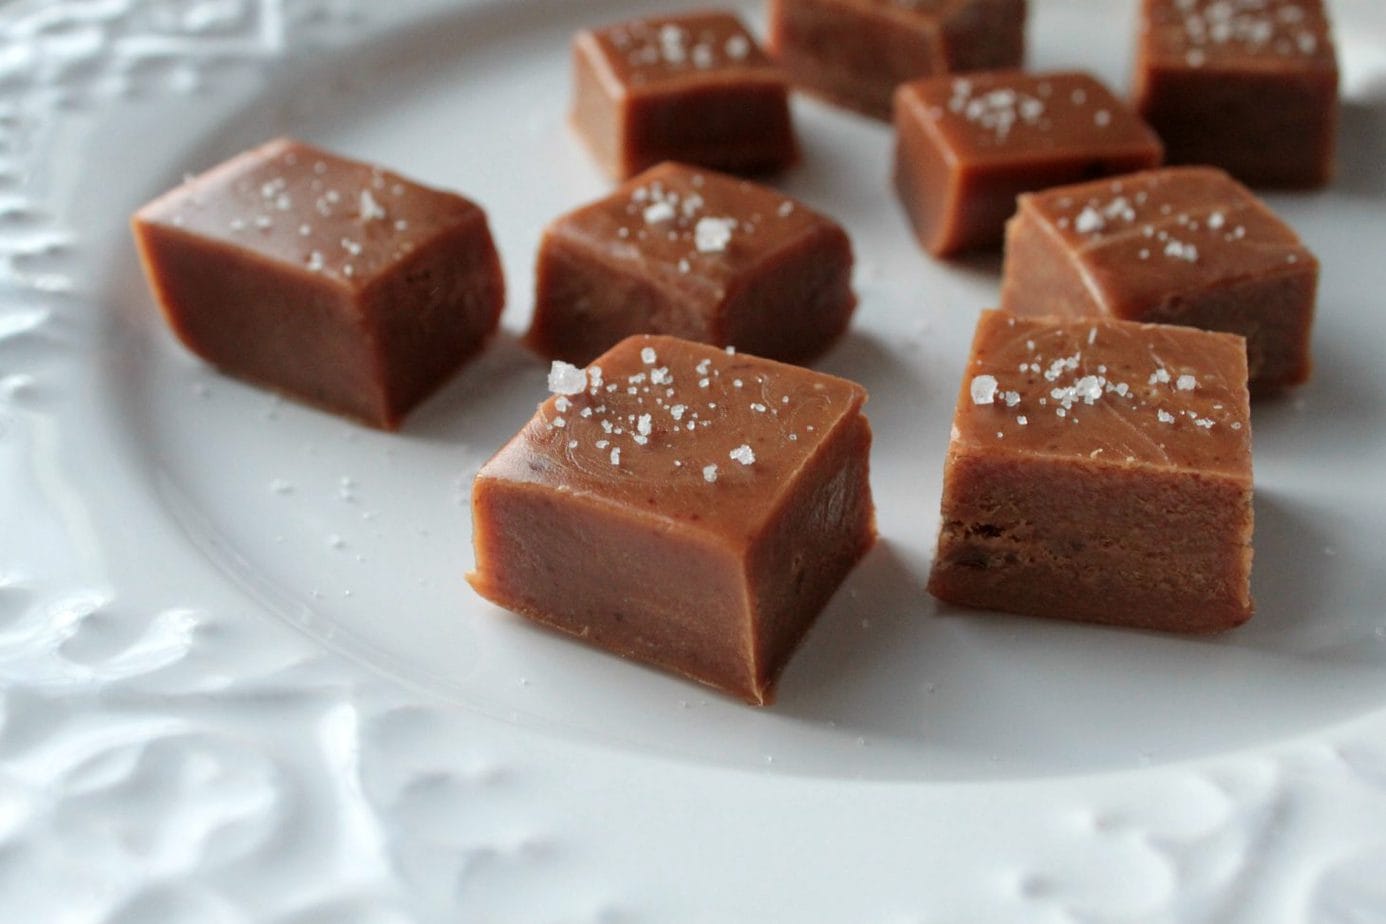 These salted caramels are soft, chewy and perfectly melt away in your mouth. The Honey Jack really gives you a nice little kick in the sweet tooth! #saltedcaramels #homemadecandy #candy